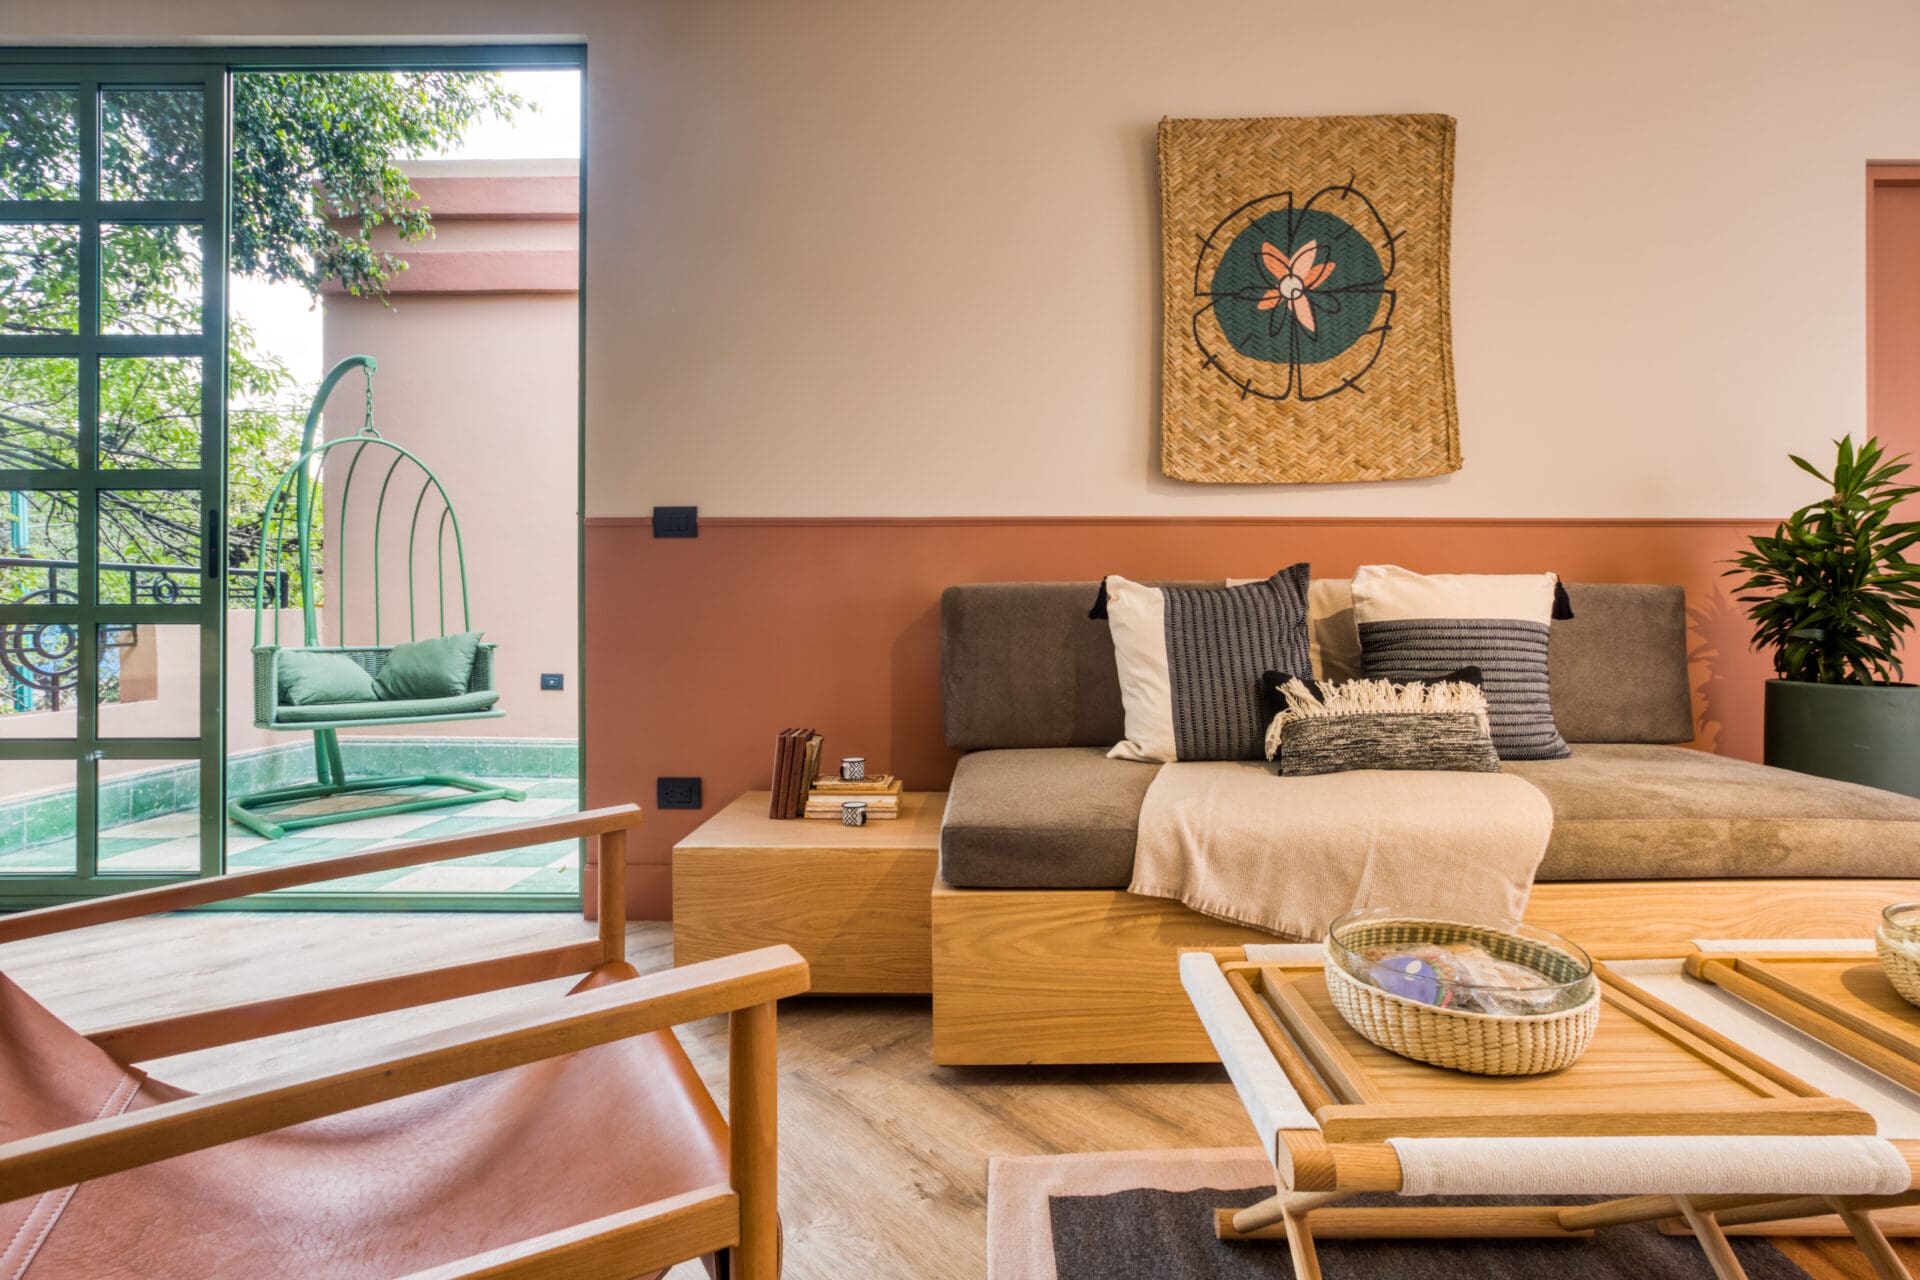 The best hotels in Mexico City | An interior view of a sitting room in Casa Oliva, with crittal doors opening to an outdoor terrace.